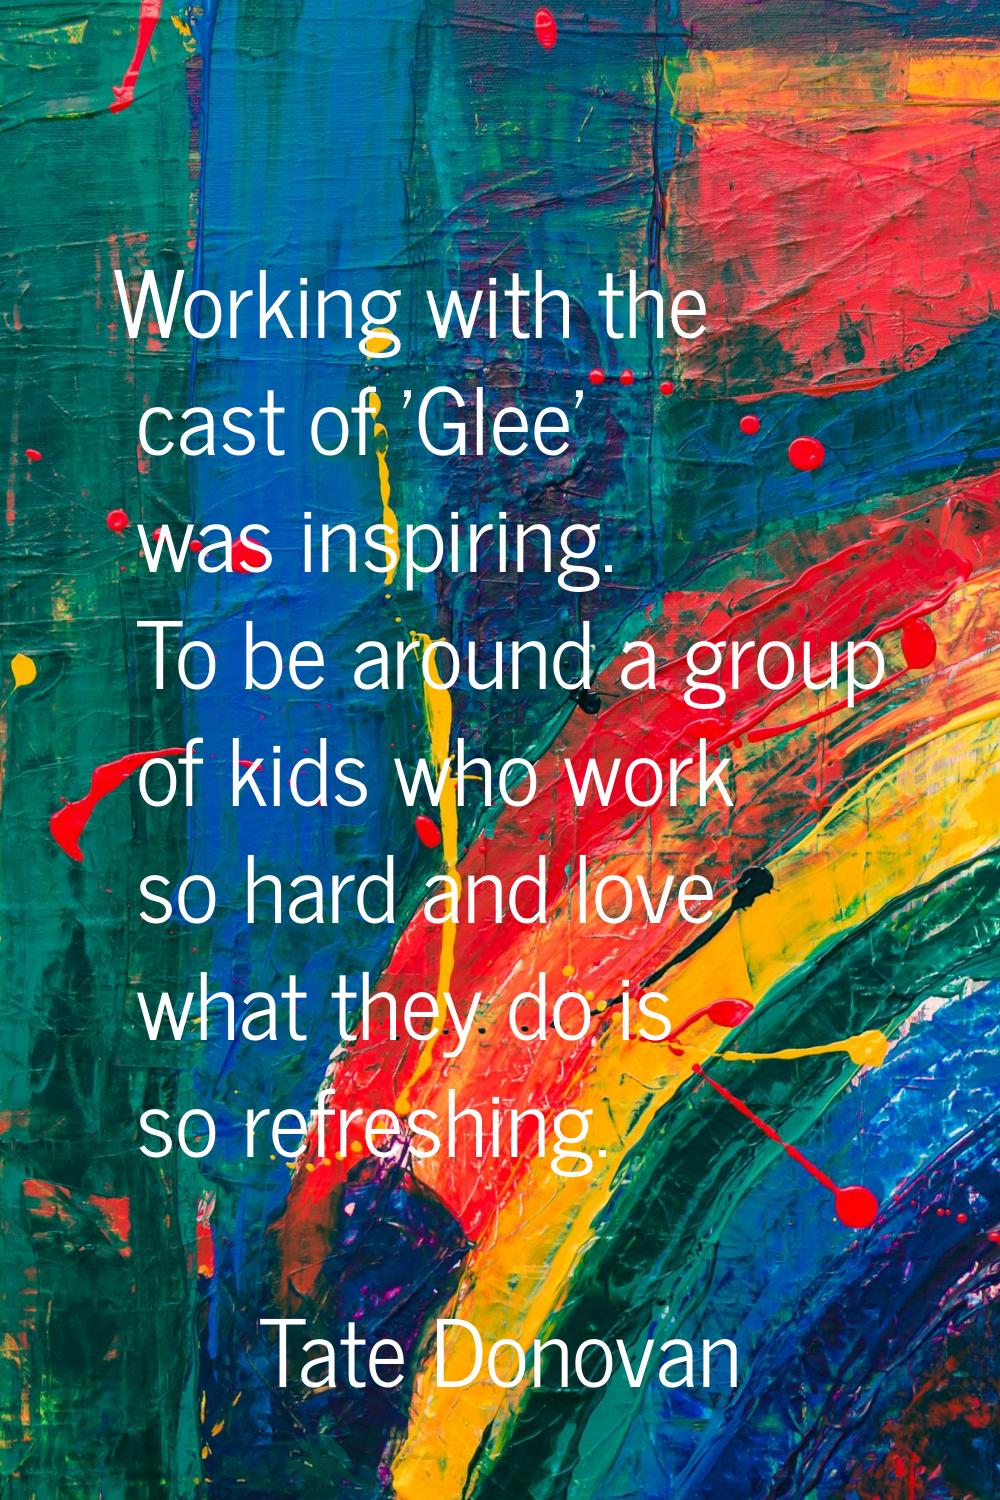 Working with the cast of 'Glee' was inspiring. To be around a group of kids who work so hard and lo